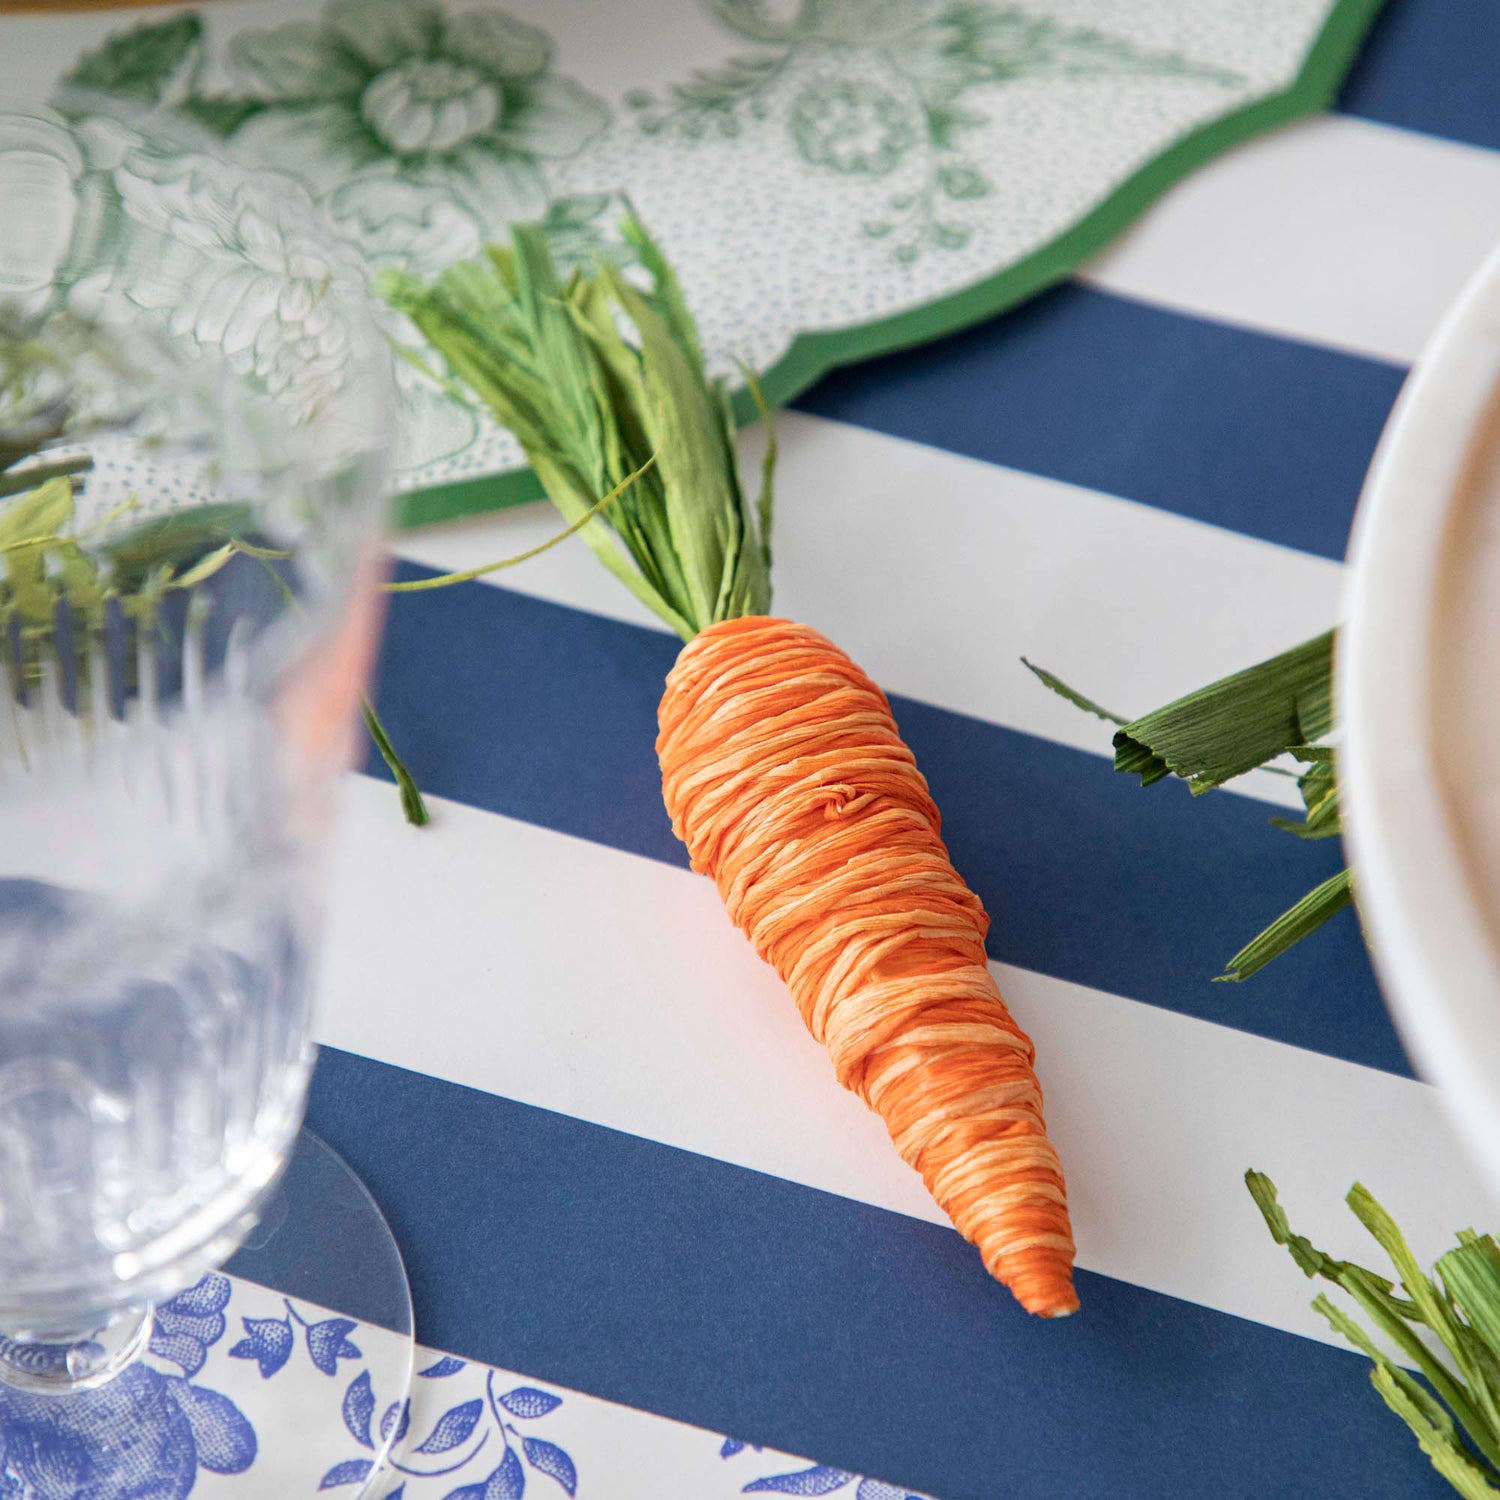 A Glitterville Easter basket filled with Natural Carrots sits on a blue and white striped tablecloth.